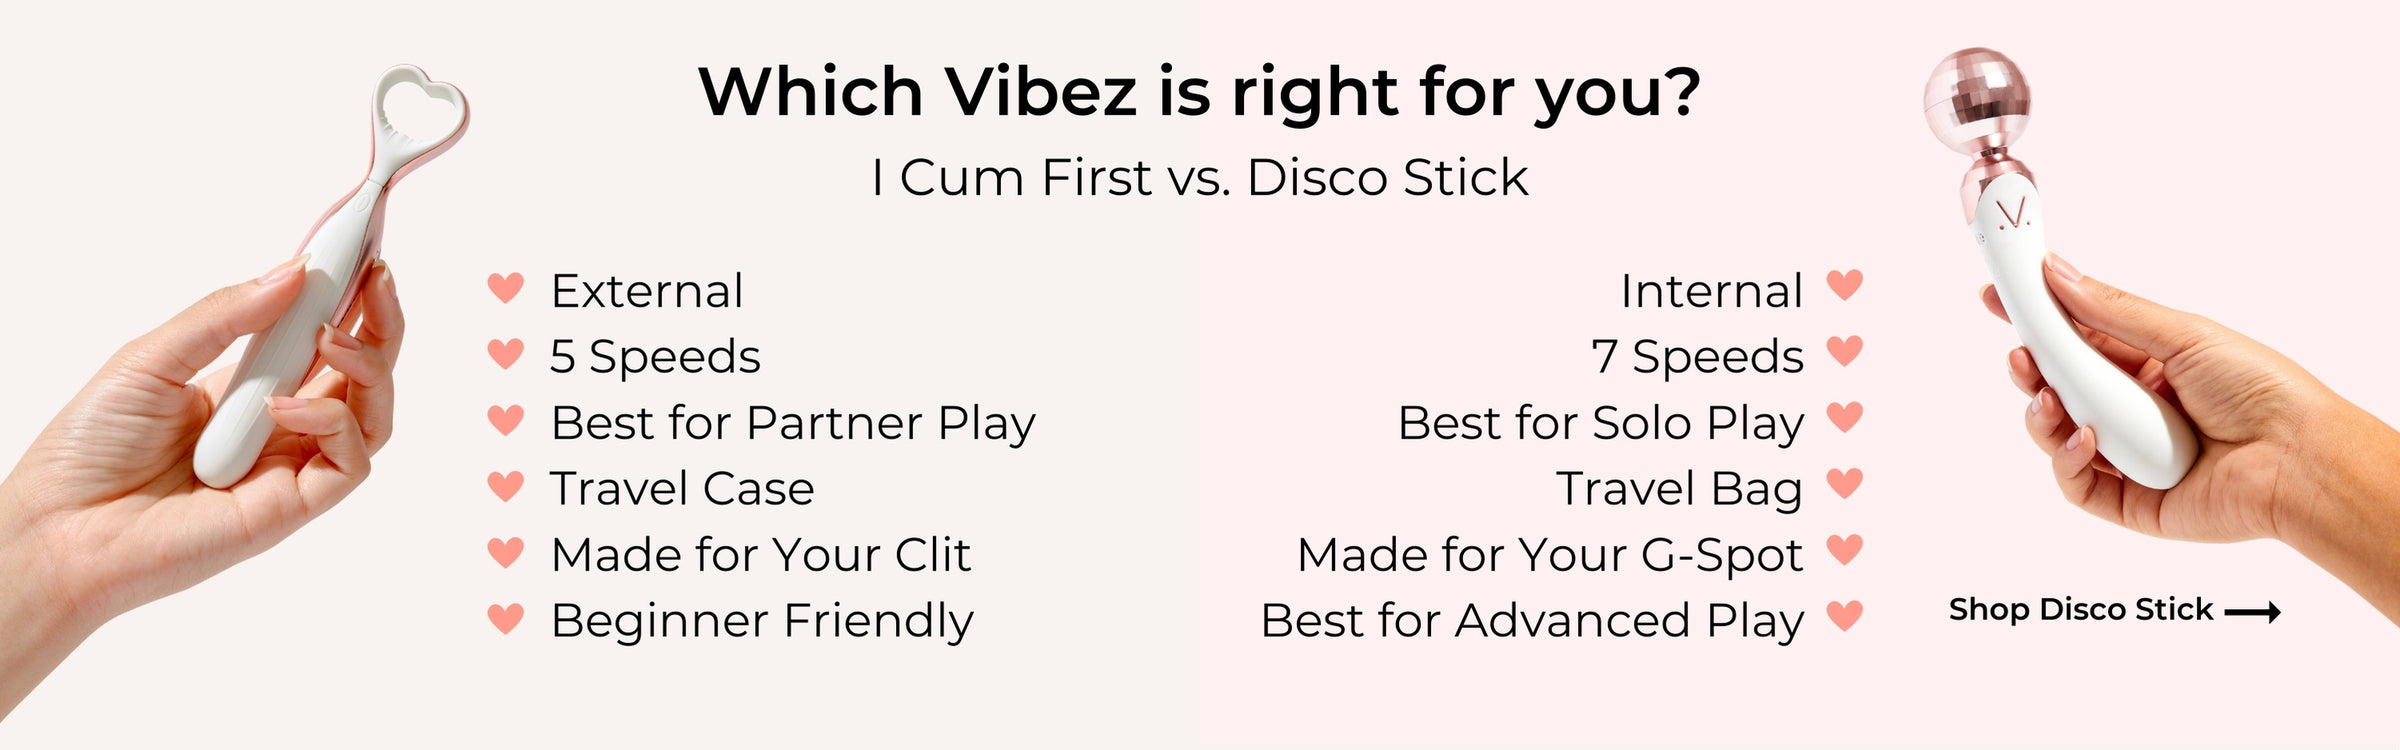 Which Vibez is Right For You